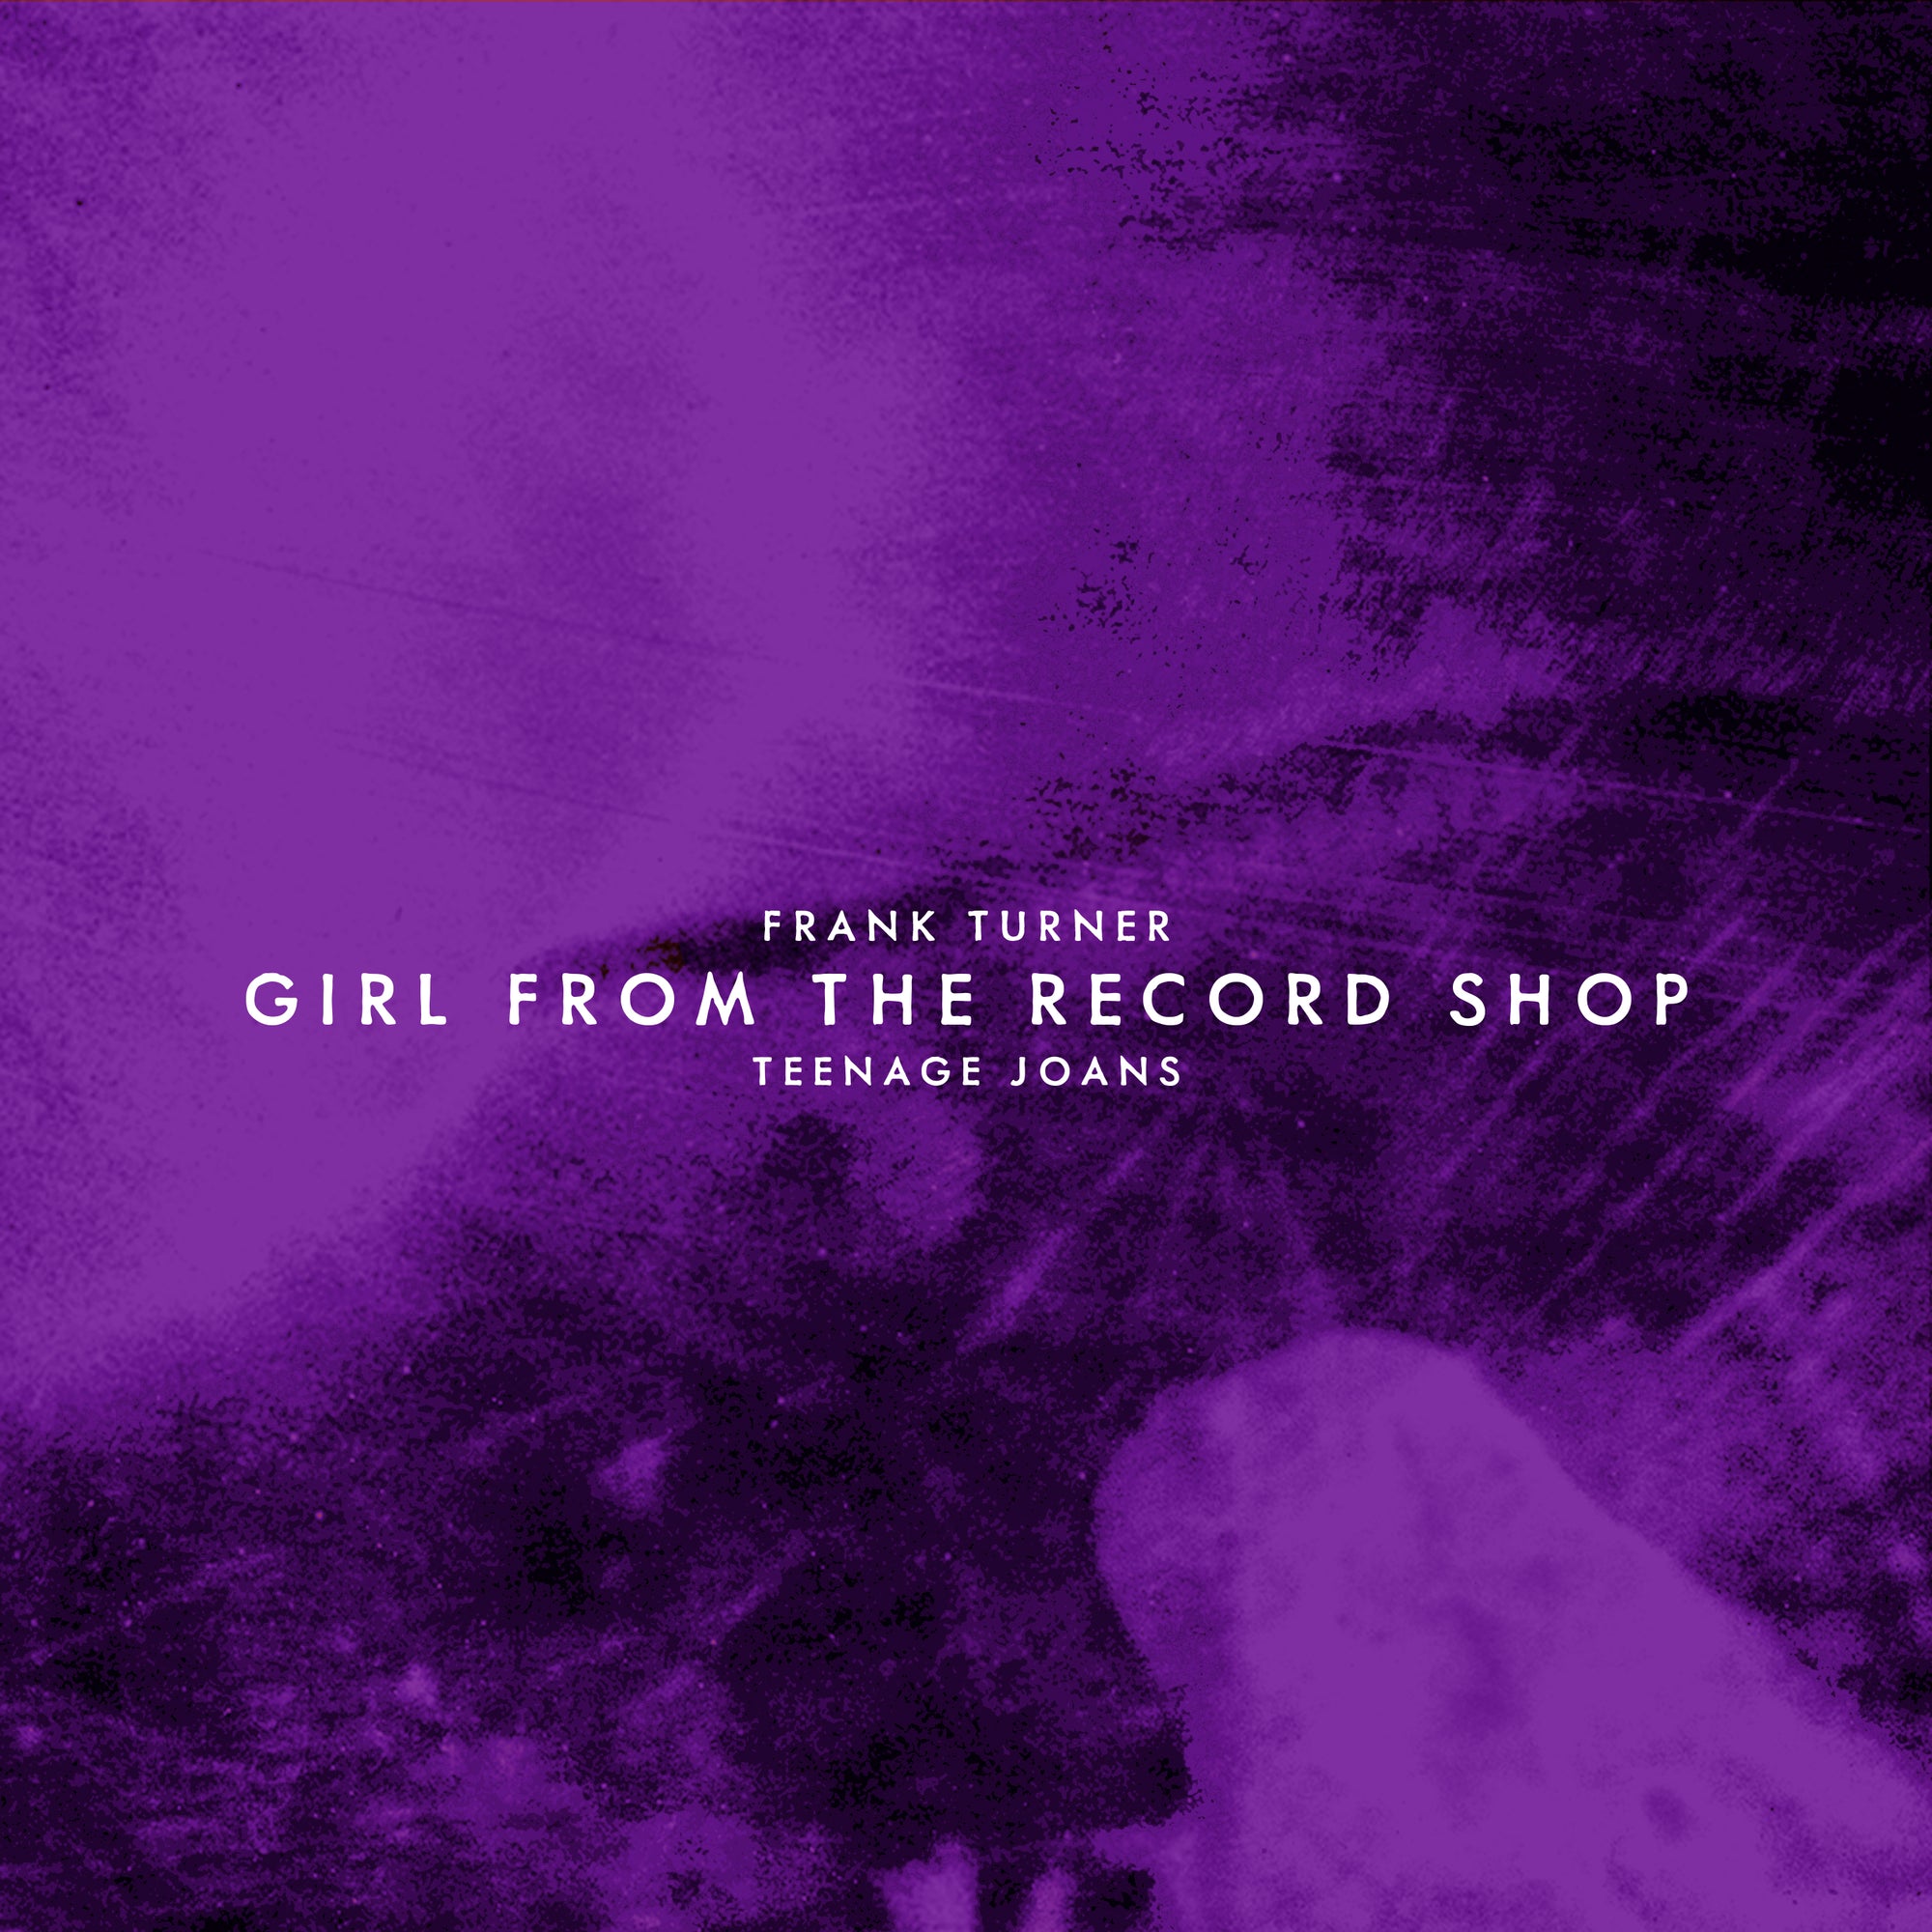 Frank Turner teams up with Teenage Joans on new rendition of ‘Girl From The Record Shop’